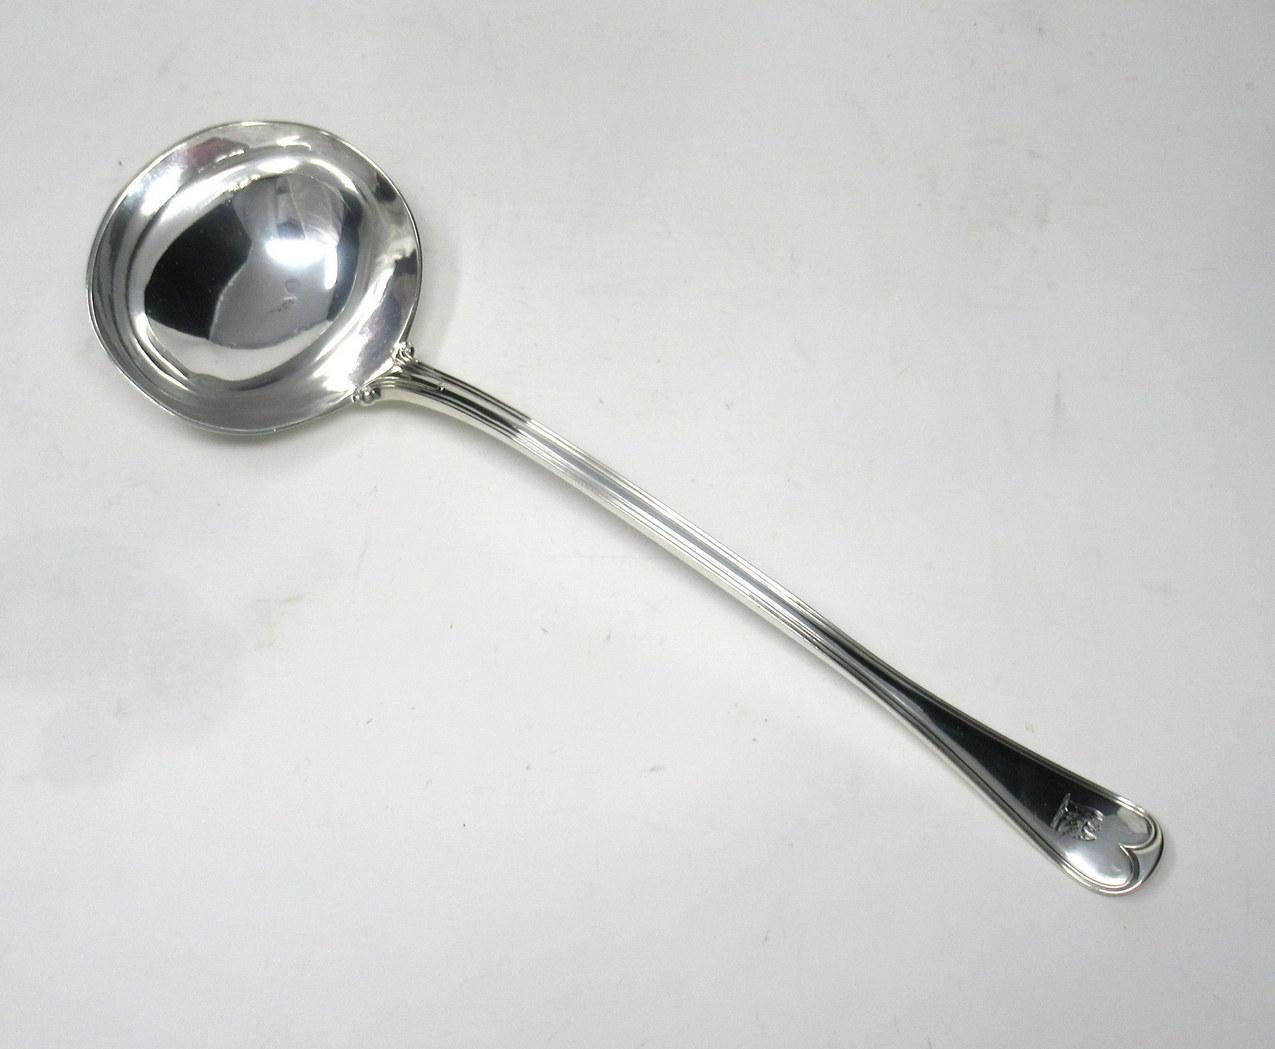 A very impressive crested English sterling silver soup ladle of exceptional quality and unusually heavy gauge and weight silver.

Of Hanoverian form and Rat Tail pattern.

Mark of GA Chawner & Co. George William Adams. Hosier Lane, Smithfield,